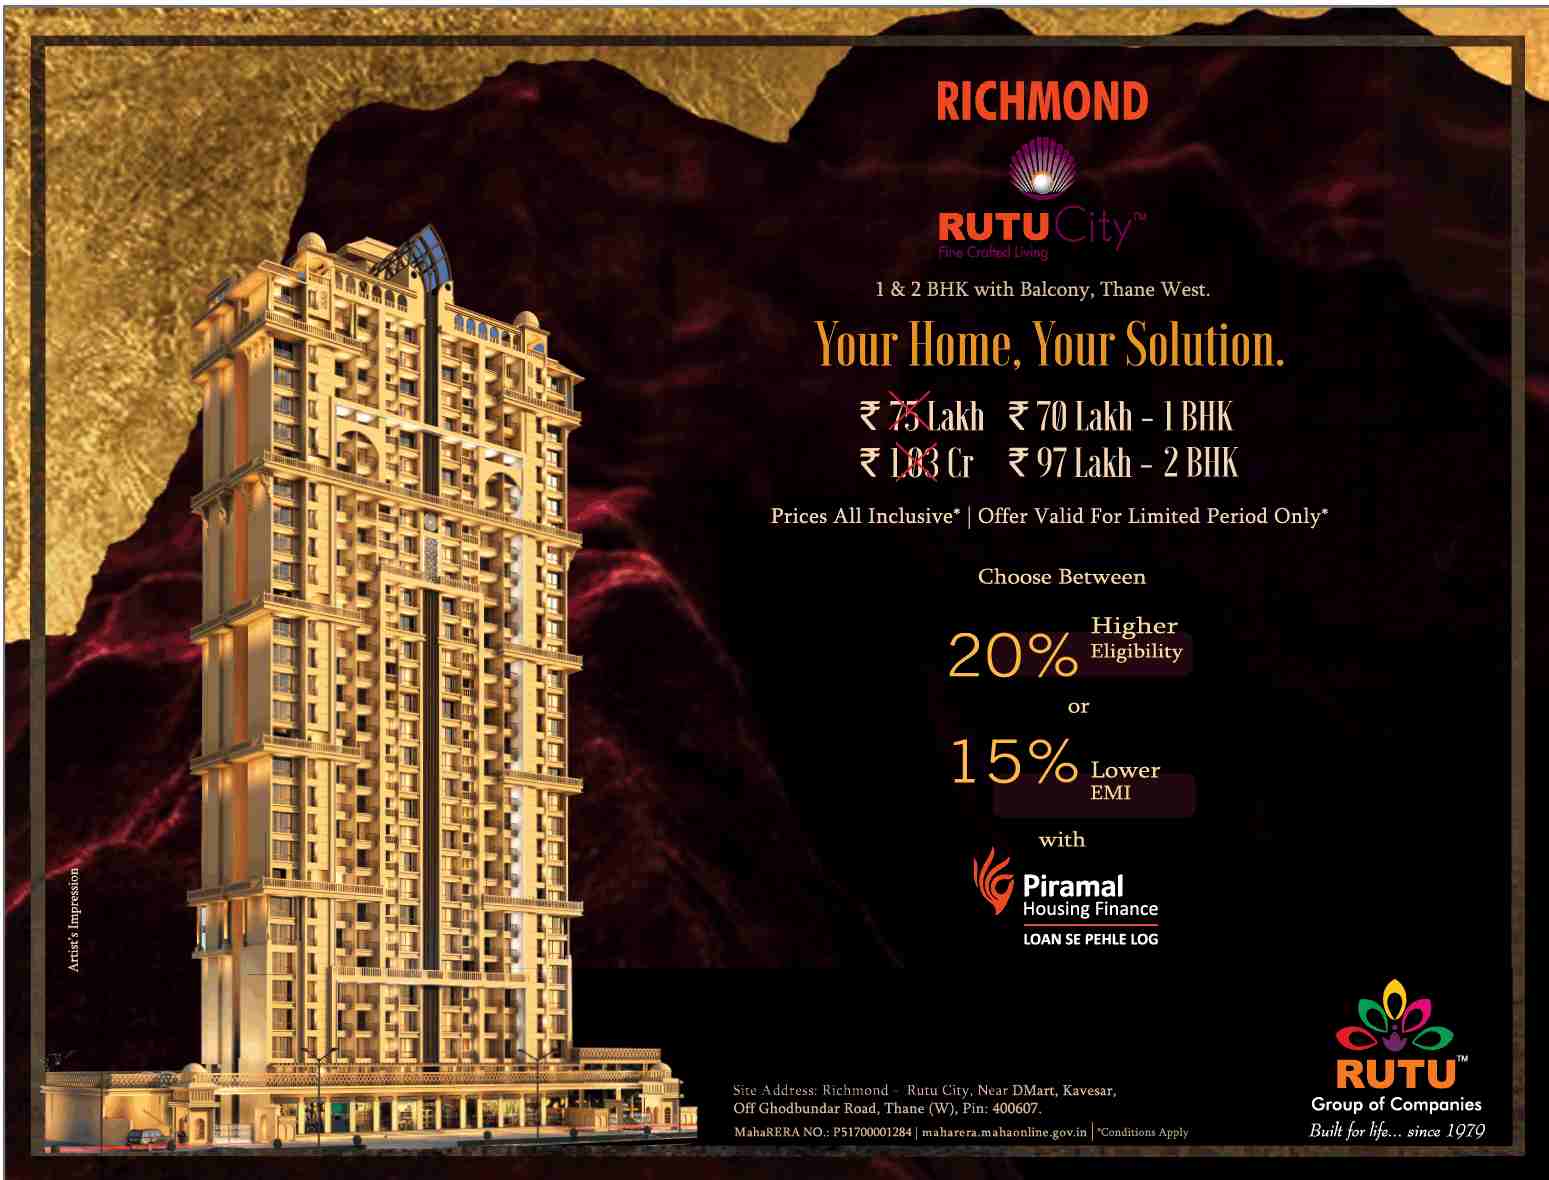 Choose between 20% higher eligibility or 15% lower EMI at Rutu Richmond in Mumbai Update